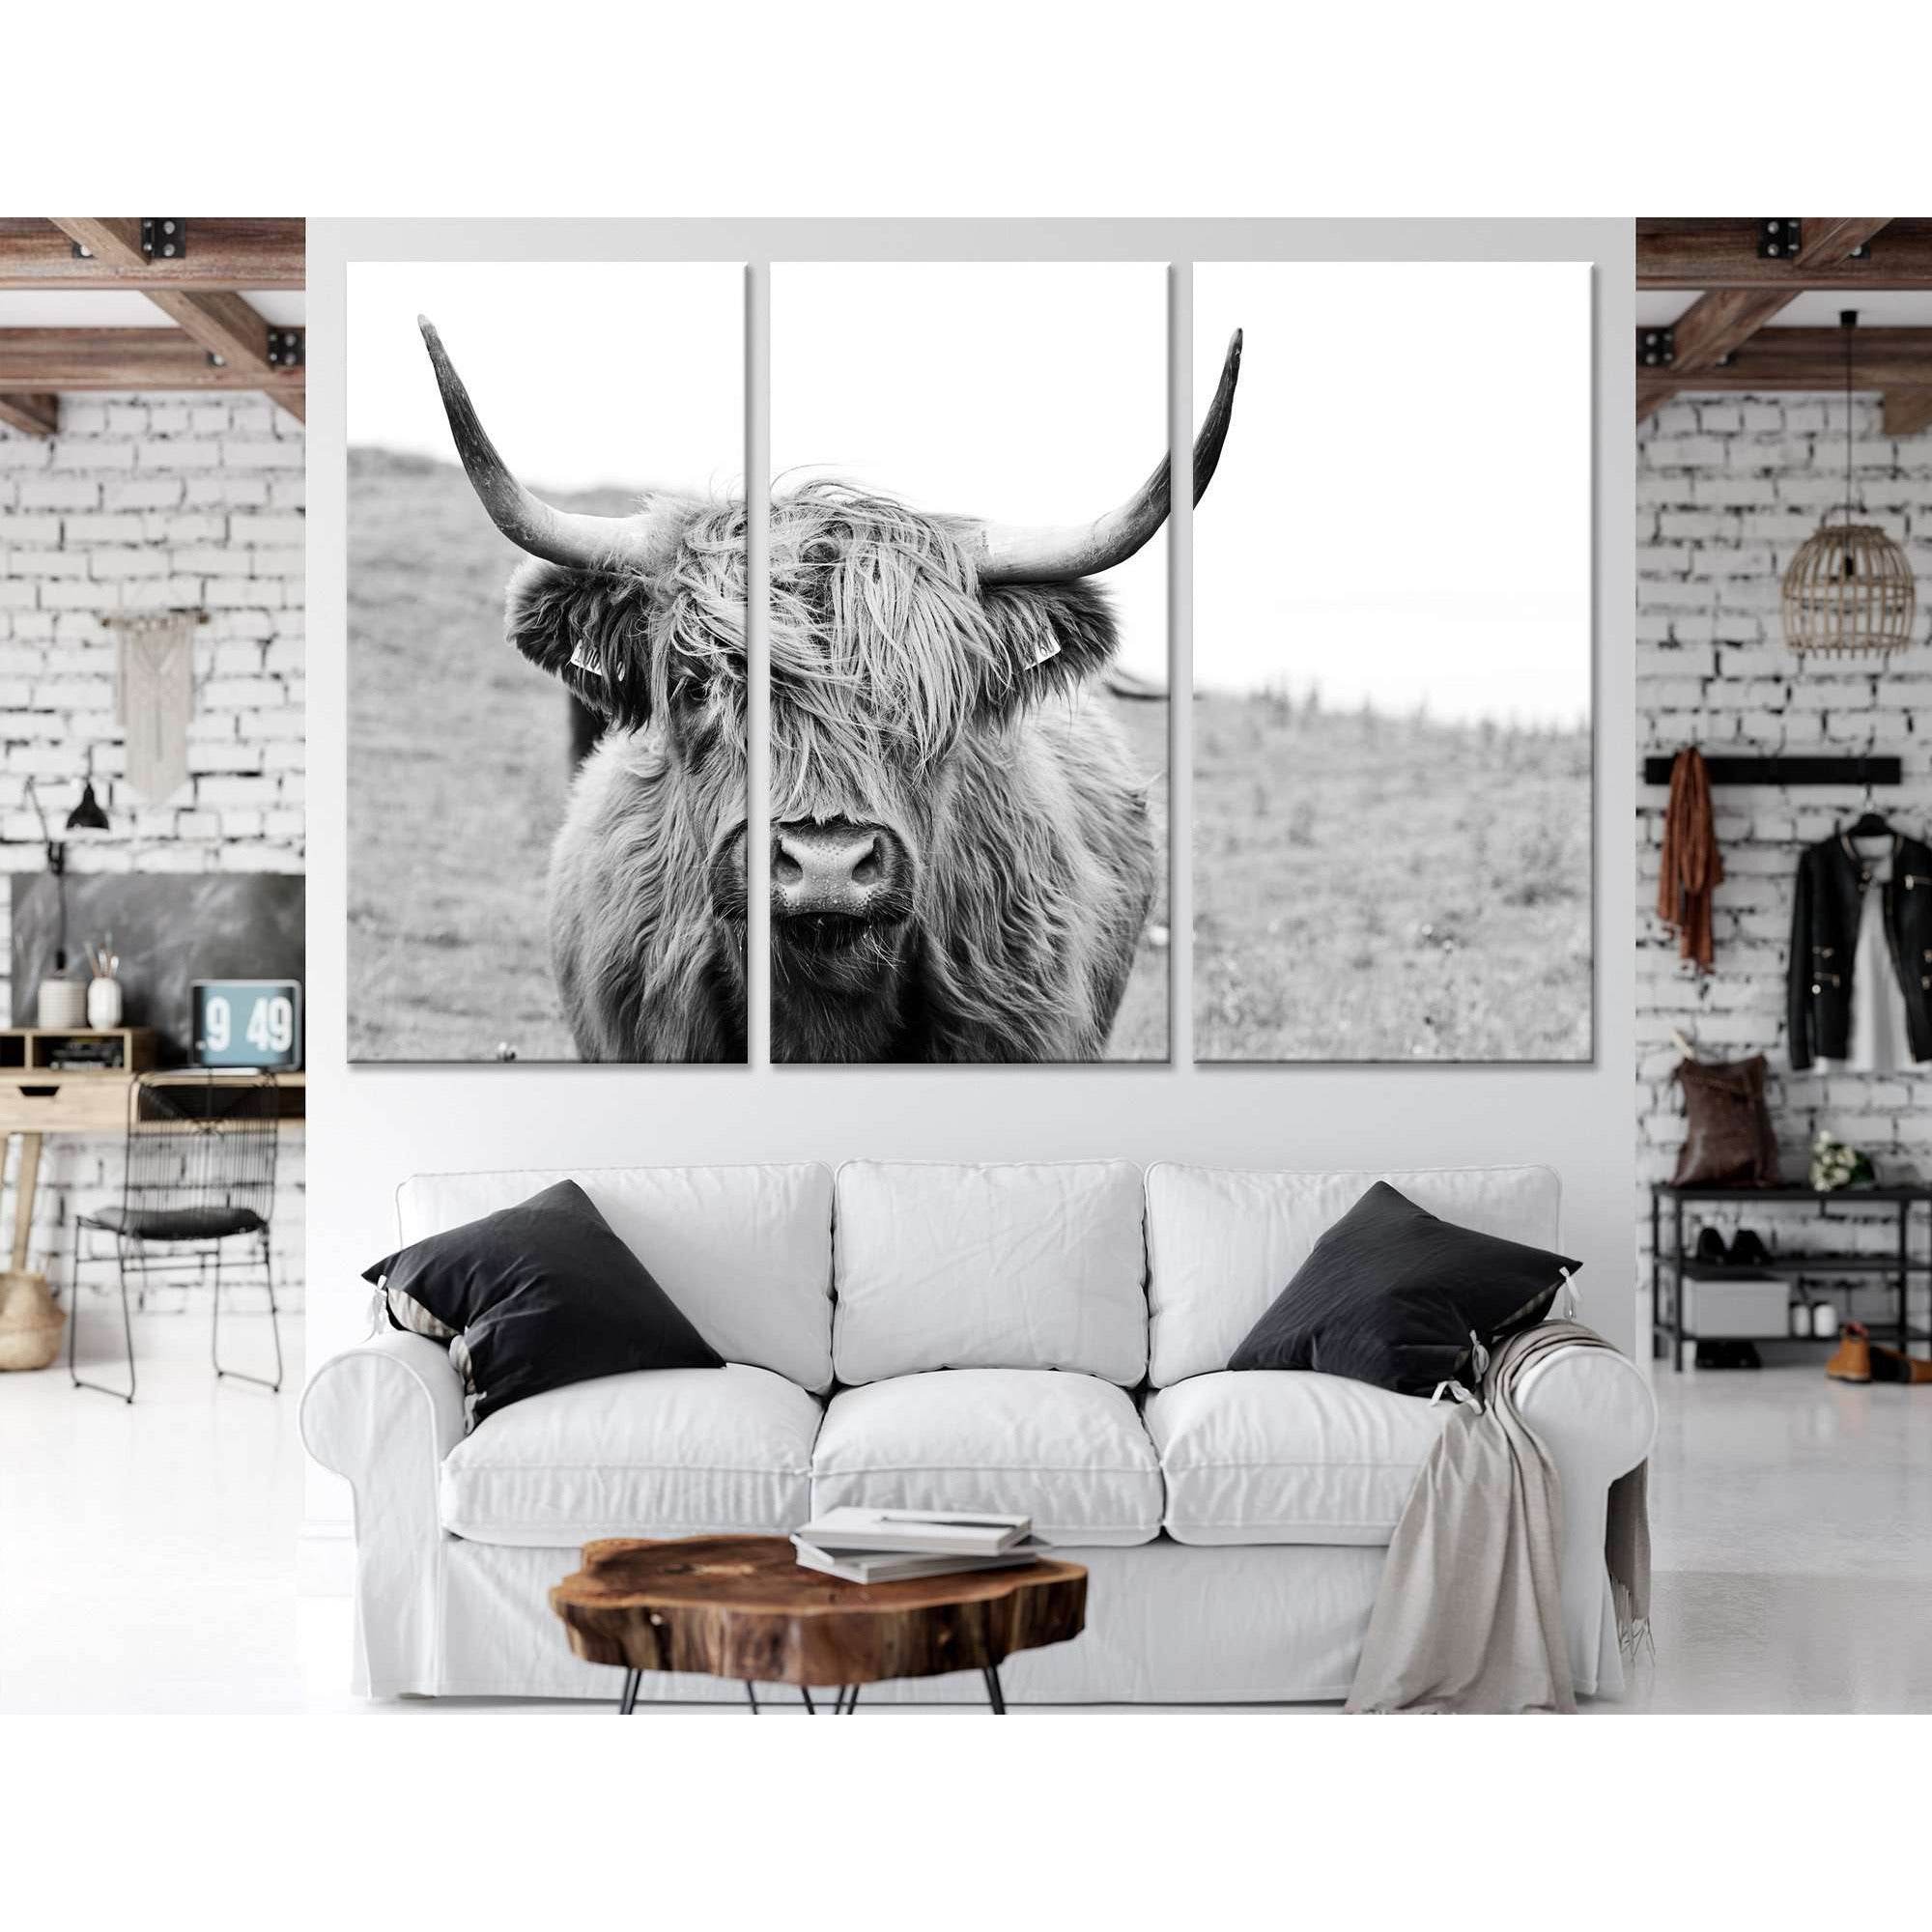 Black and White Highland Cow №04124 Ready to Hang Canvas Print